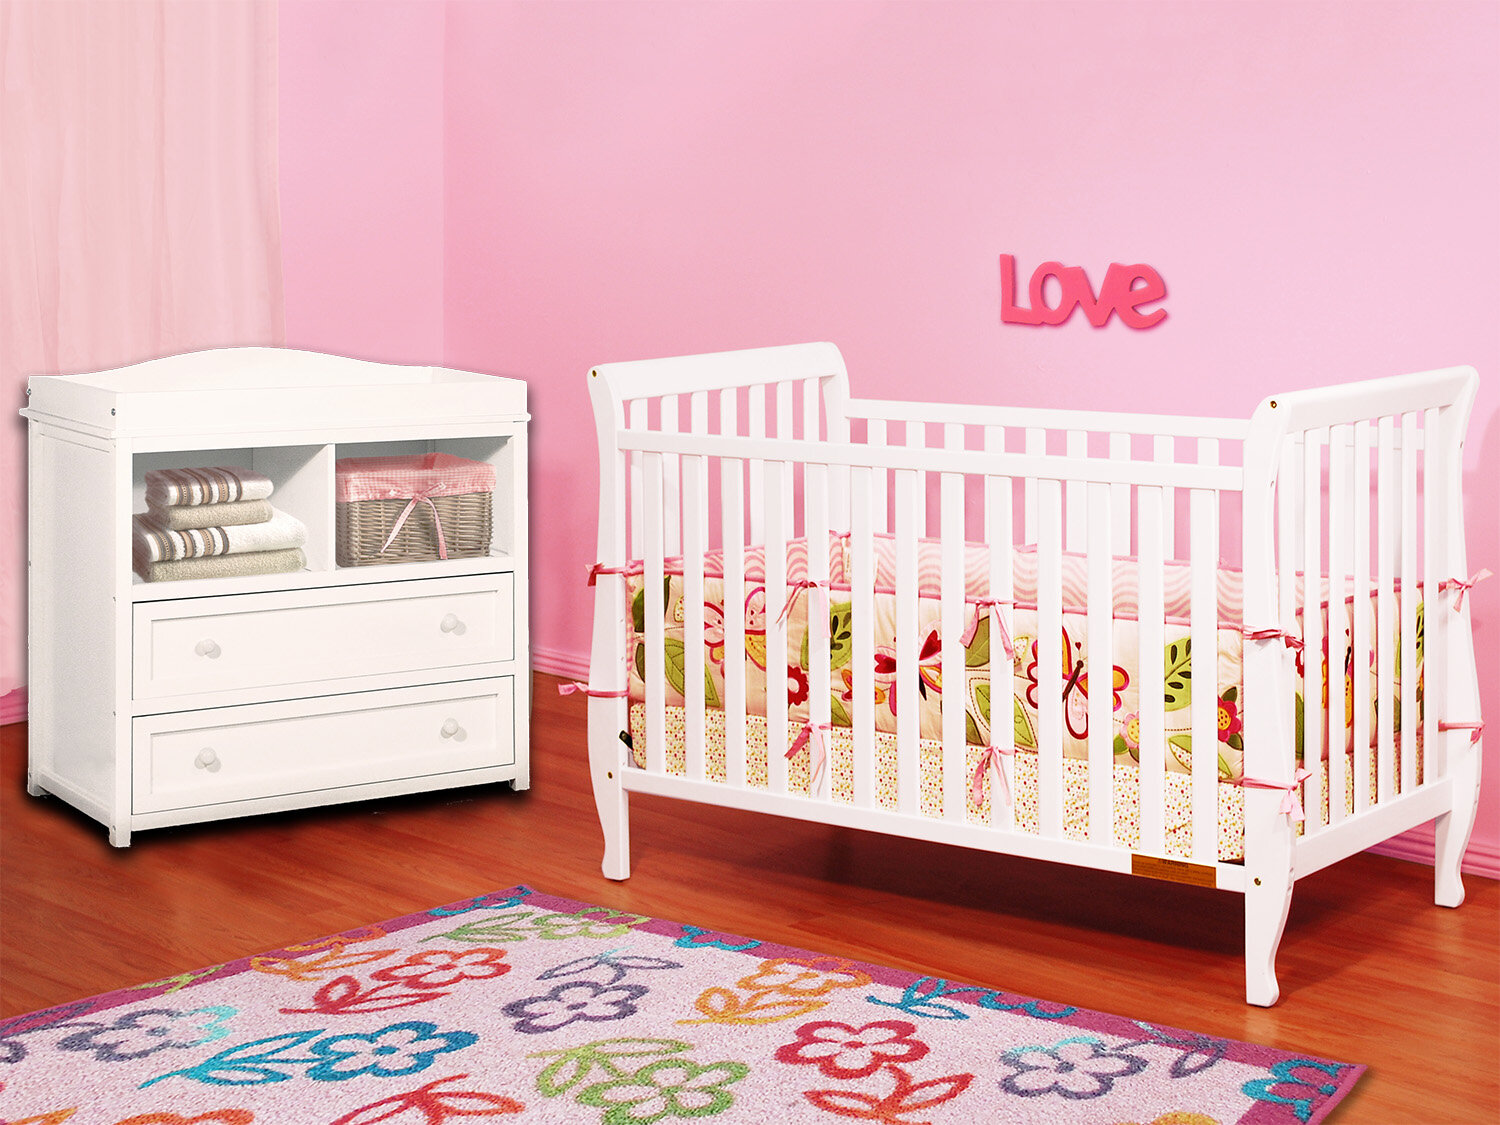 cot and changer combo